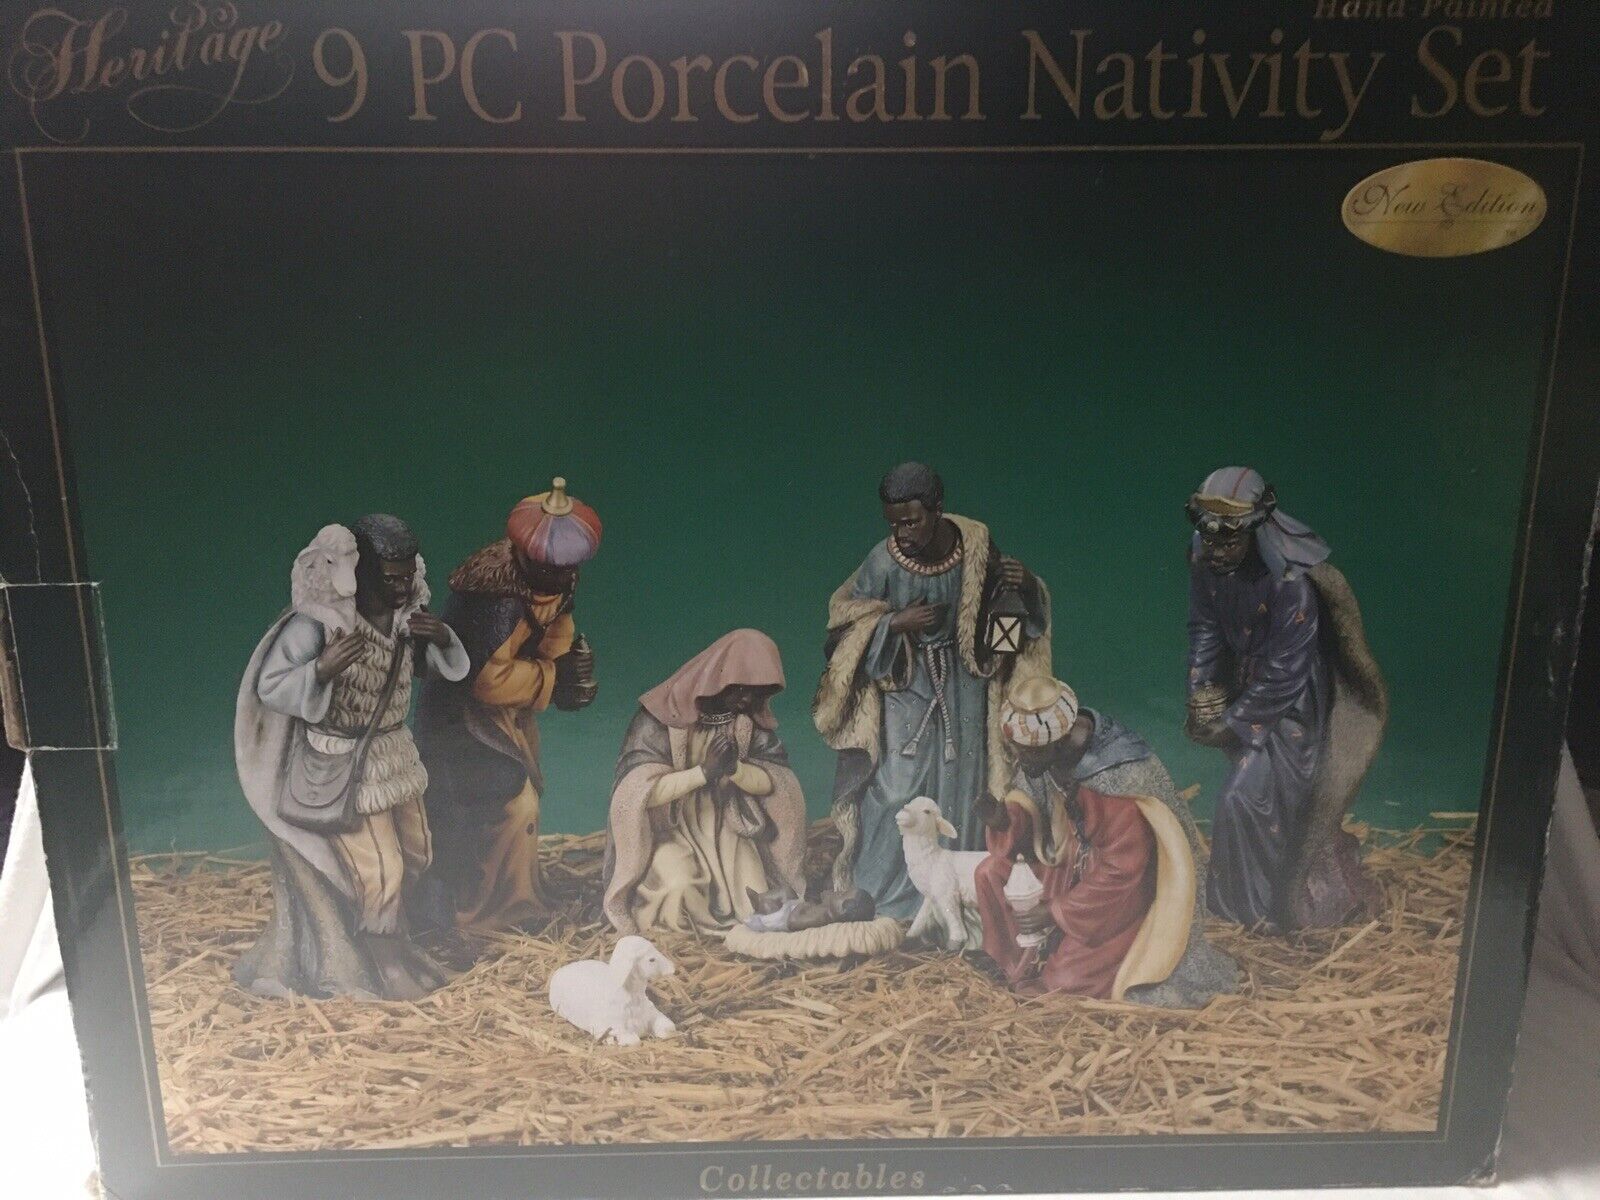 Heritage Nine Piece Porcelain Nativity Set New Edition Handpainted Collectible9”